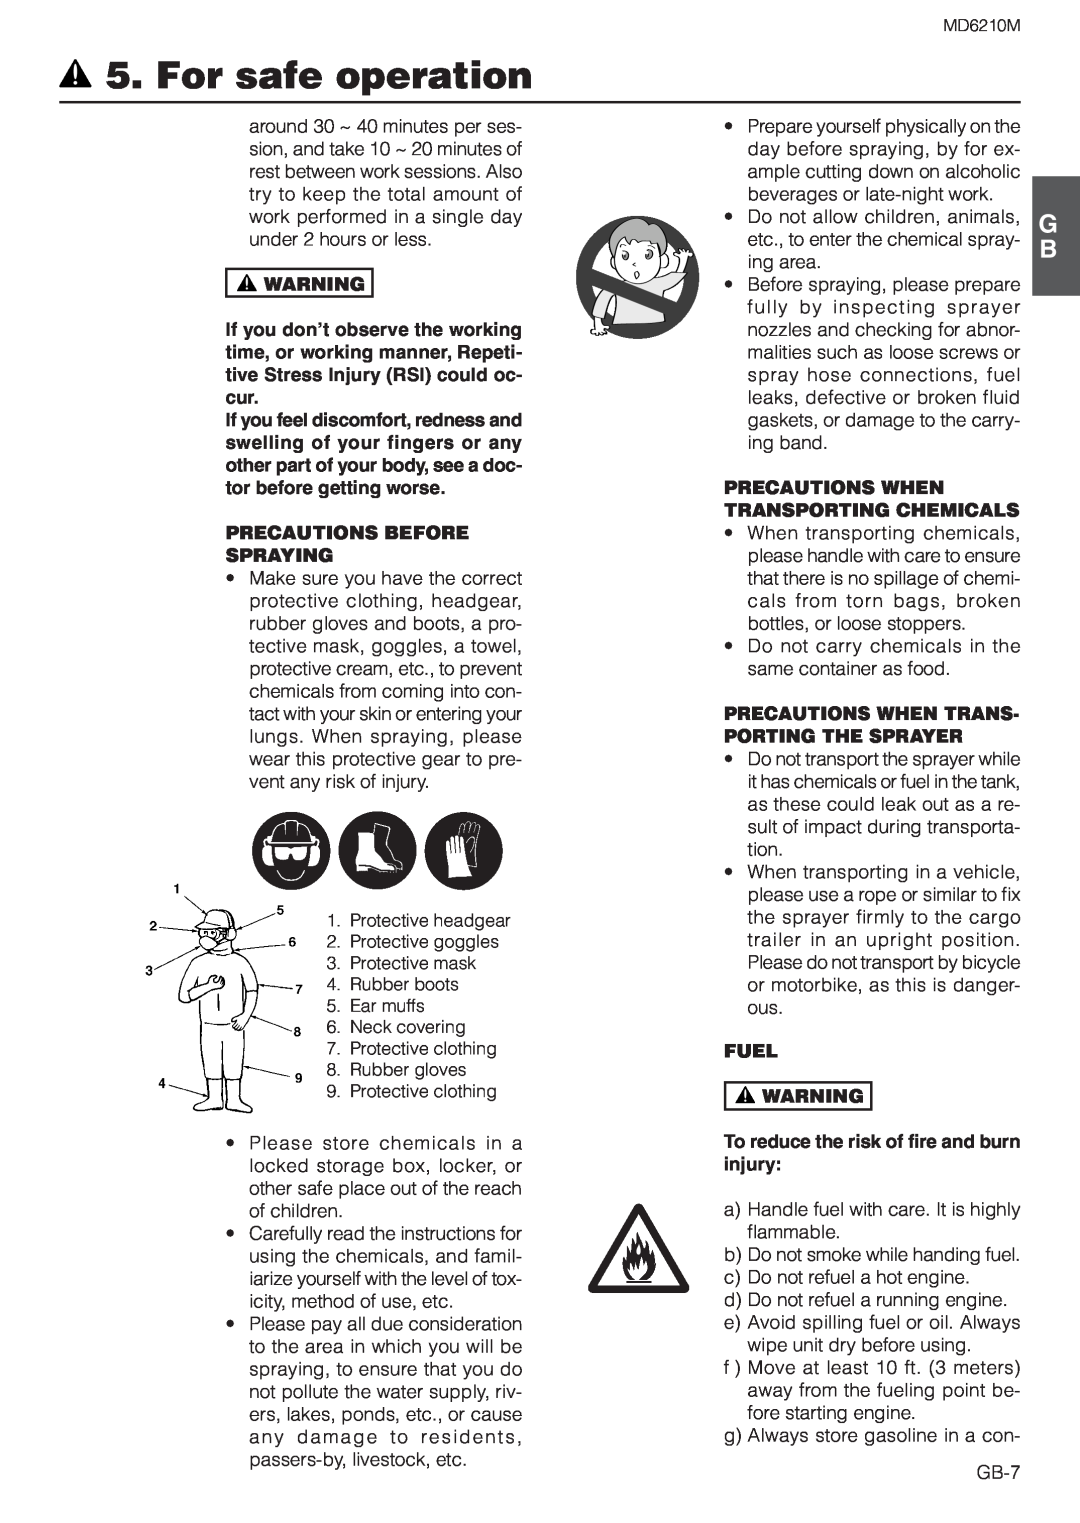 Zenoah MD6210M owner manual Precautions Before Spraying, Precautions When Transporting Chemicals, Fuel, For safe operation 